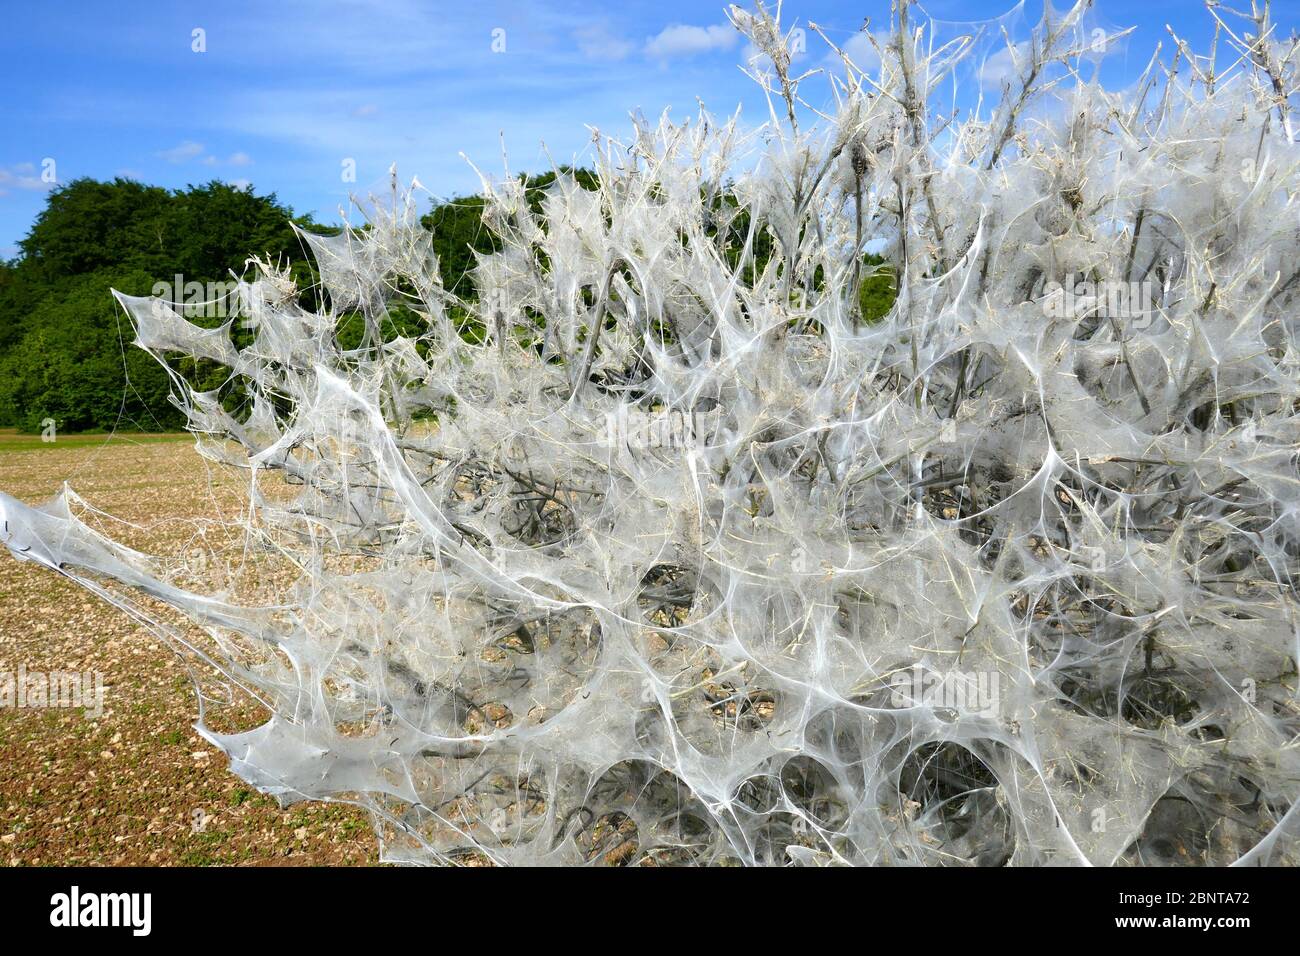 Bush covered with the webs of the Ermine Moth larva, England Stock Photo